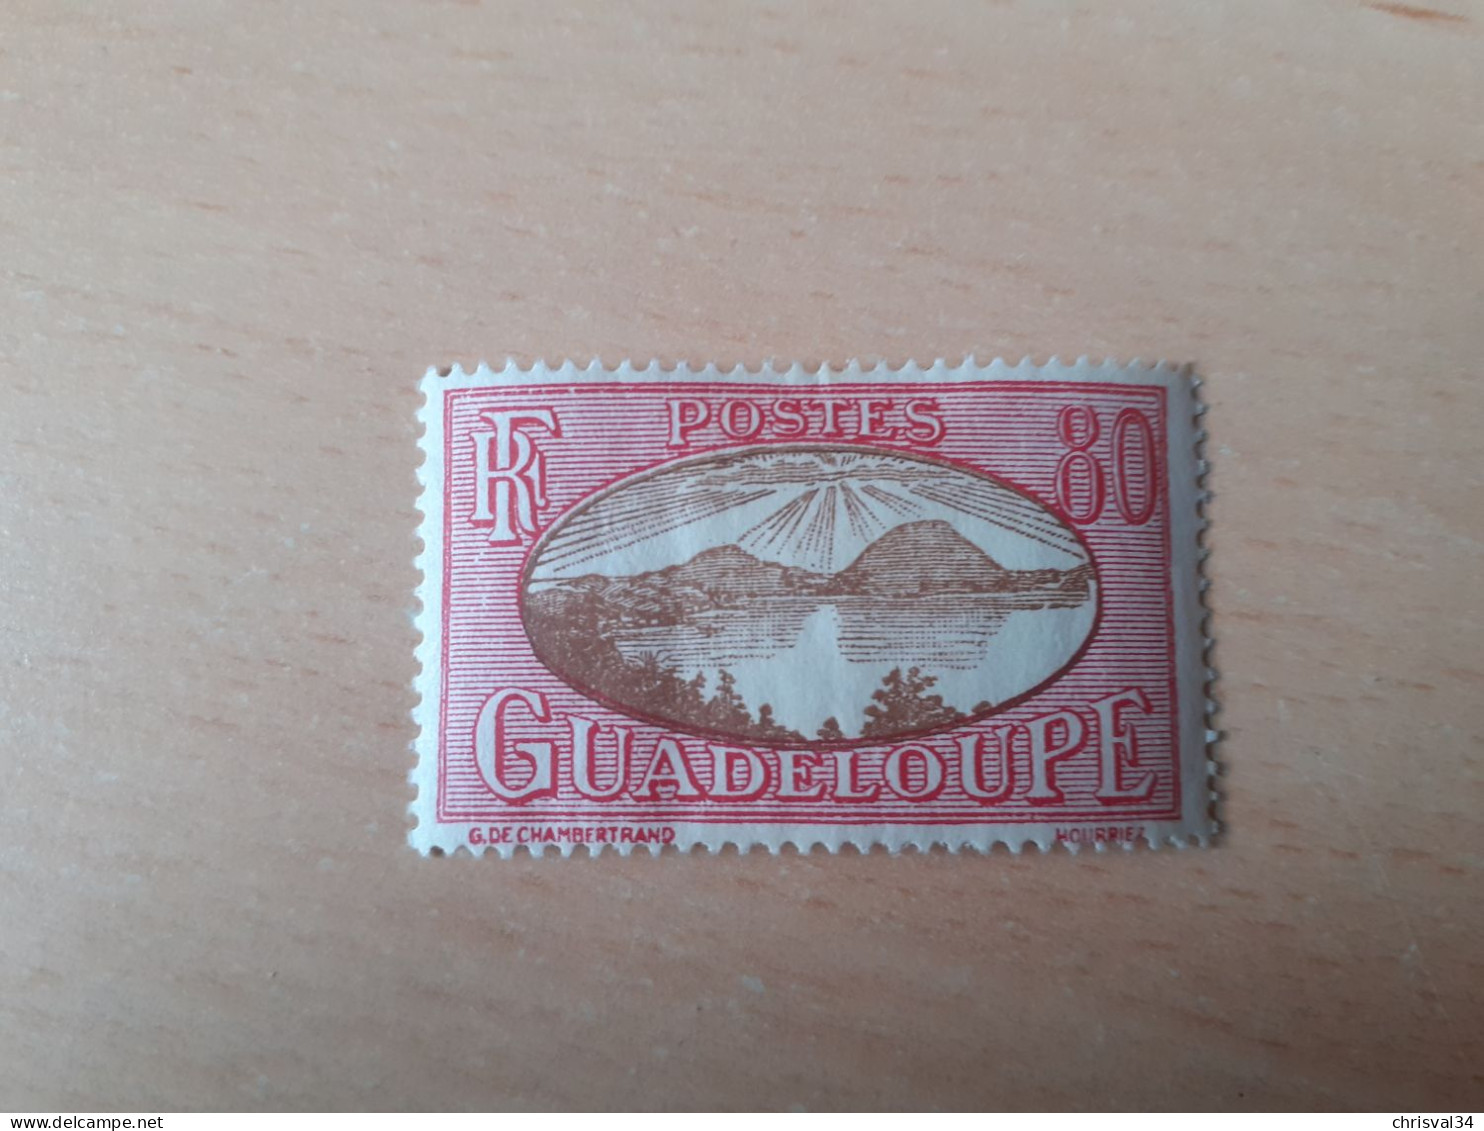 TIMBRE   GUADELOUPE       N  112A     COTE  1,00   EUROS  NEUF  TRACE  CHARNIERE - Nuevos